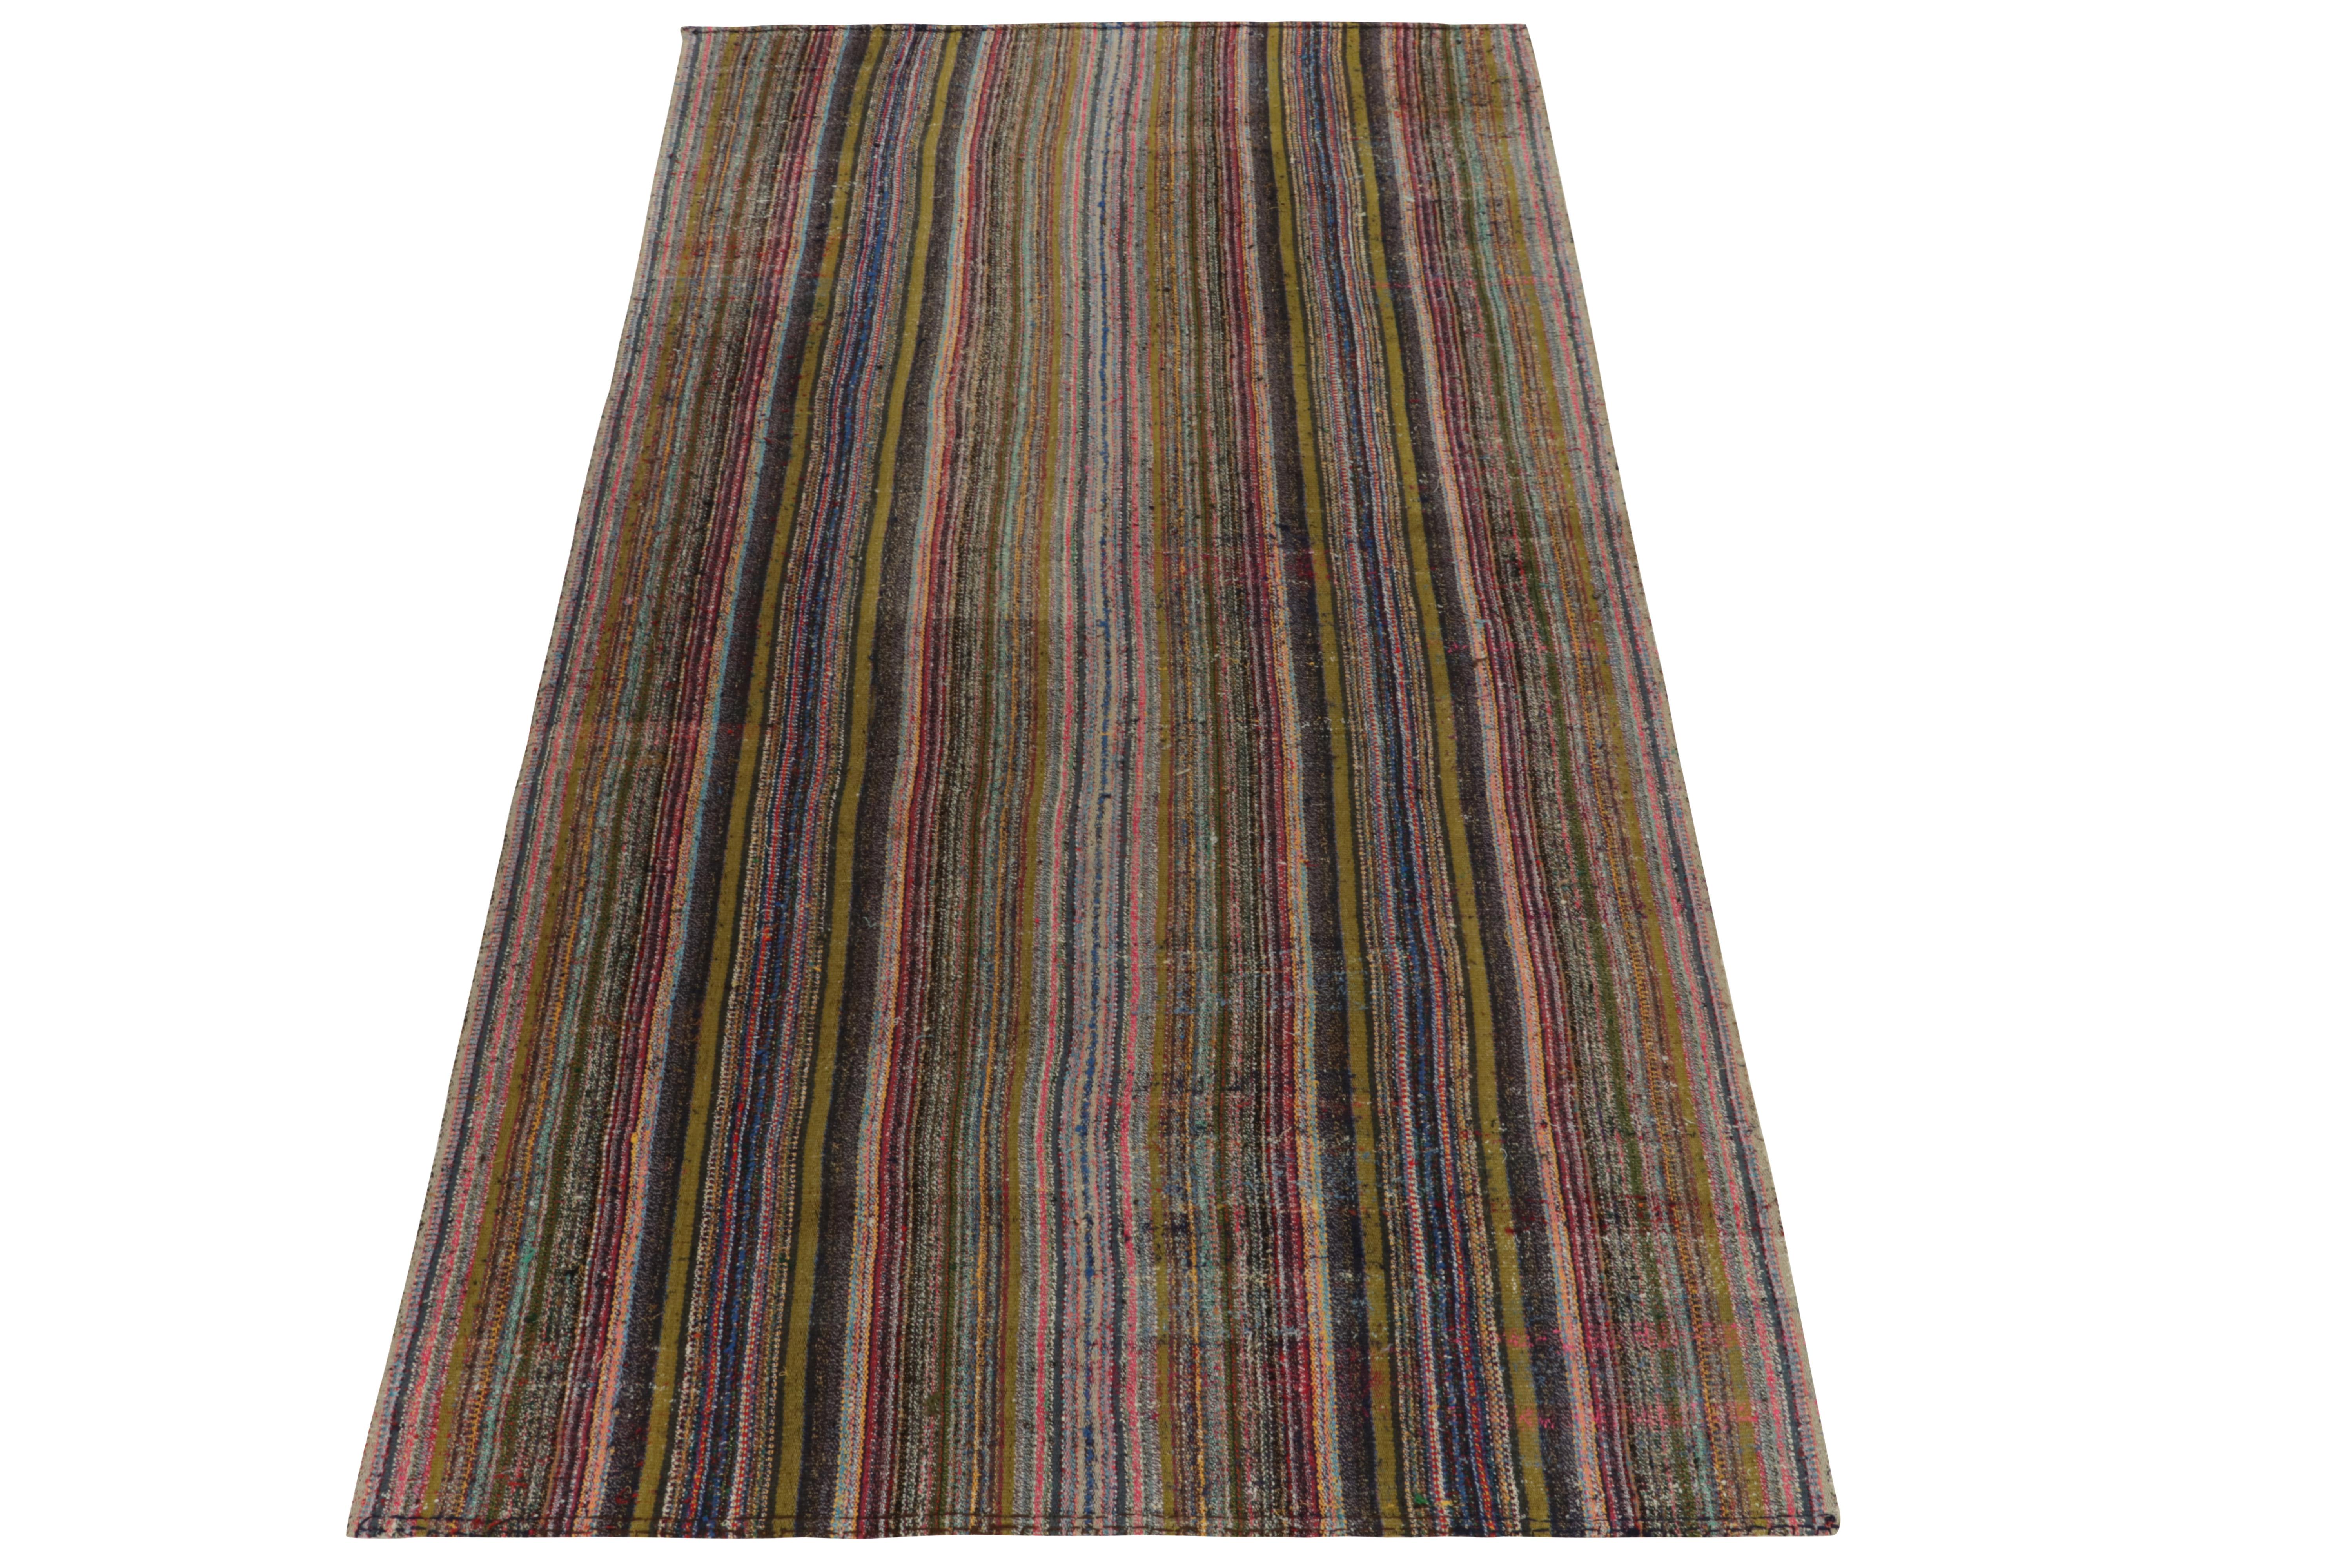 Originating from Turkey circa 1950-1960, a rare type of chaput kilim rug style making way to our Antique & Vintage selections. Characterized by fine detailing with the colors within the polychromatic stripes, the quiet piece welcomes a departure